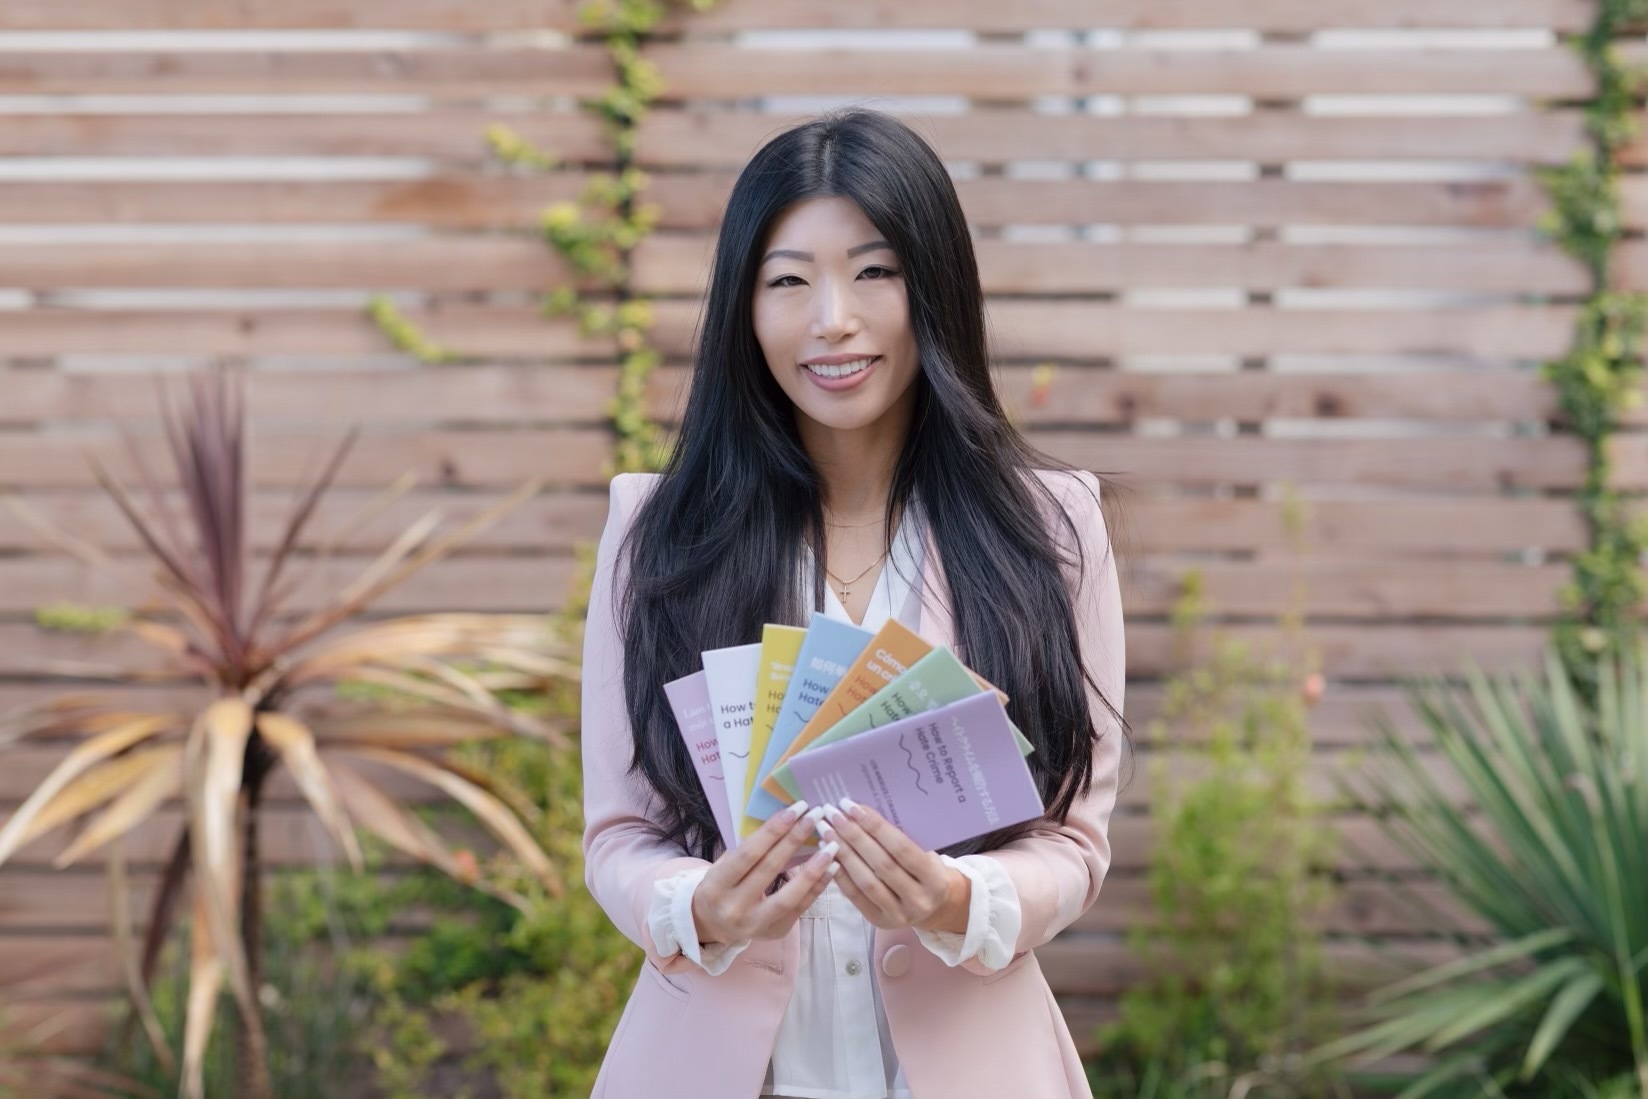 PHOTO: Esther Lim is pictured here with her "How to Report a Hate Crime" booklets. 